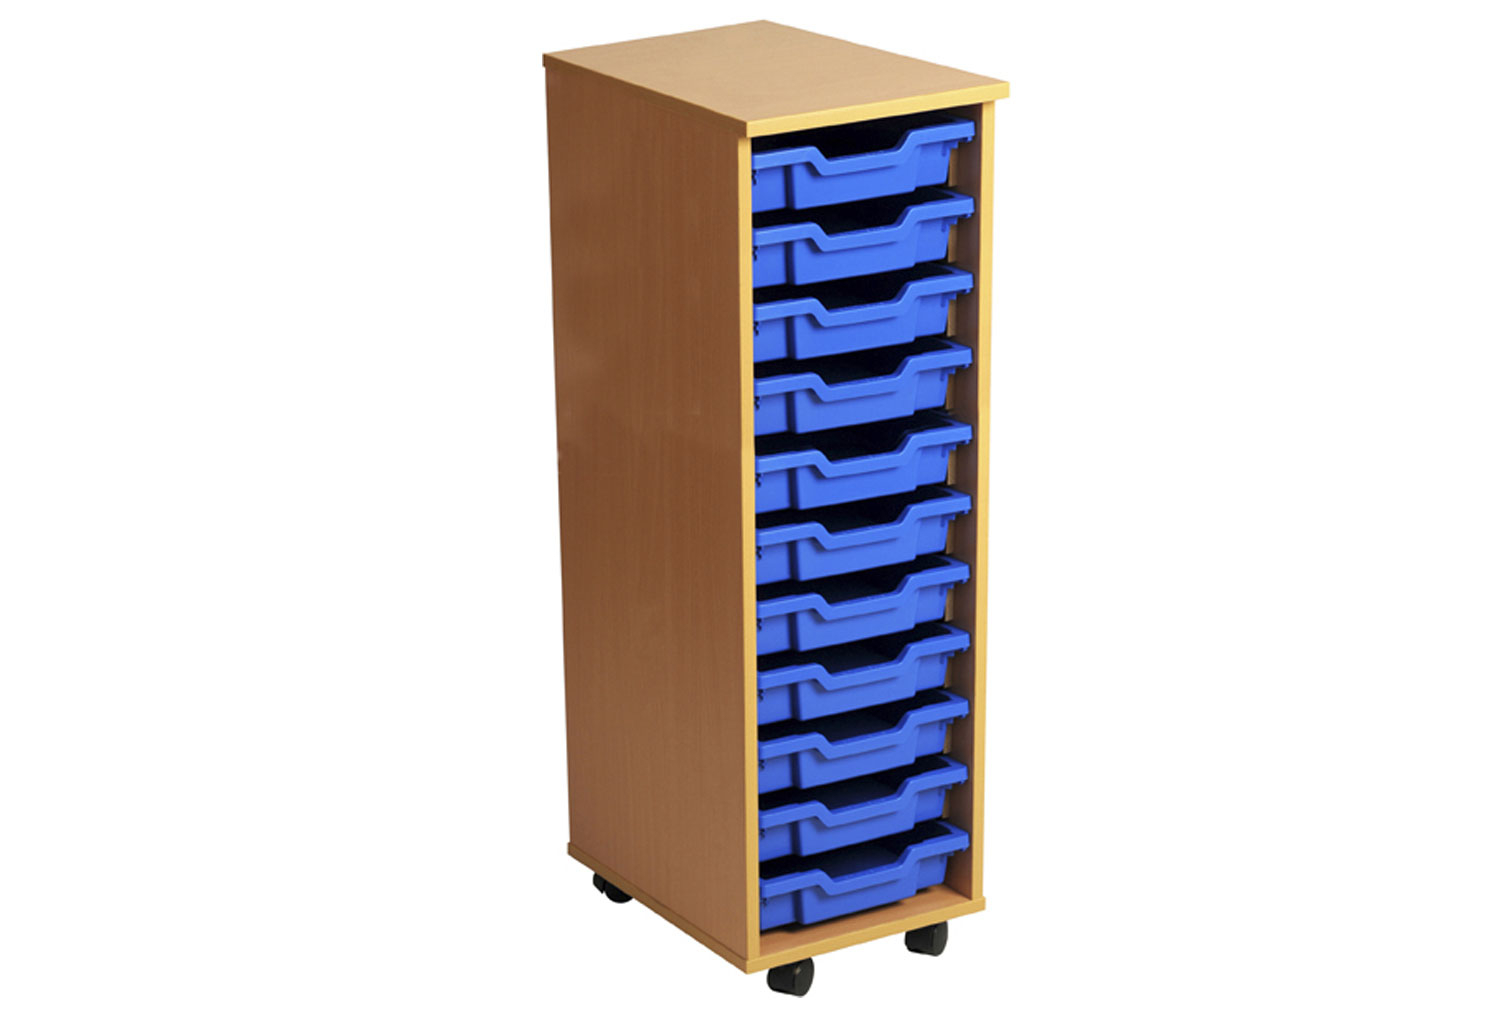 Primary Single Column Mobile Classroom Tray Storage Unit With 11 Shallow Classroom Trays, Beech/ Blue Classroom Trays